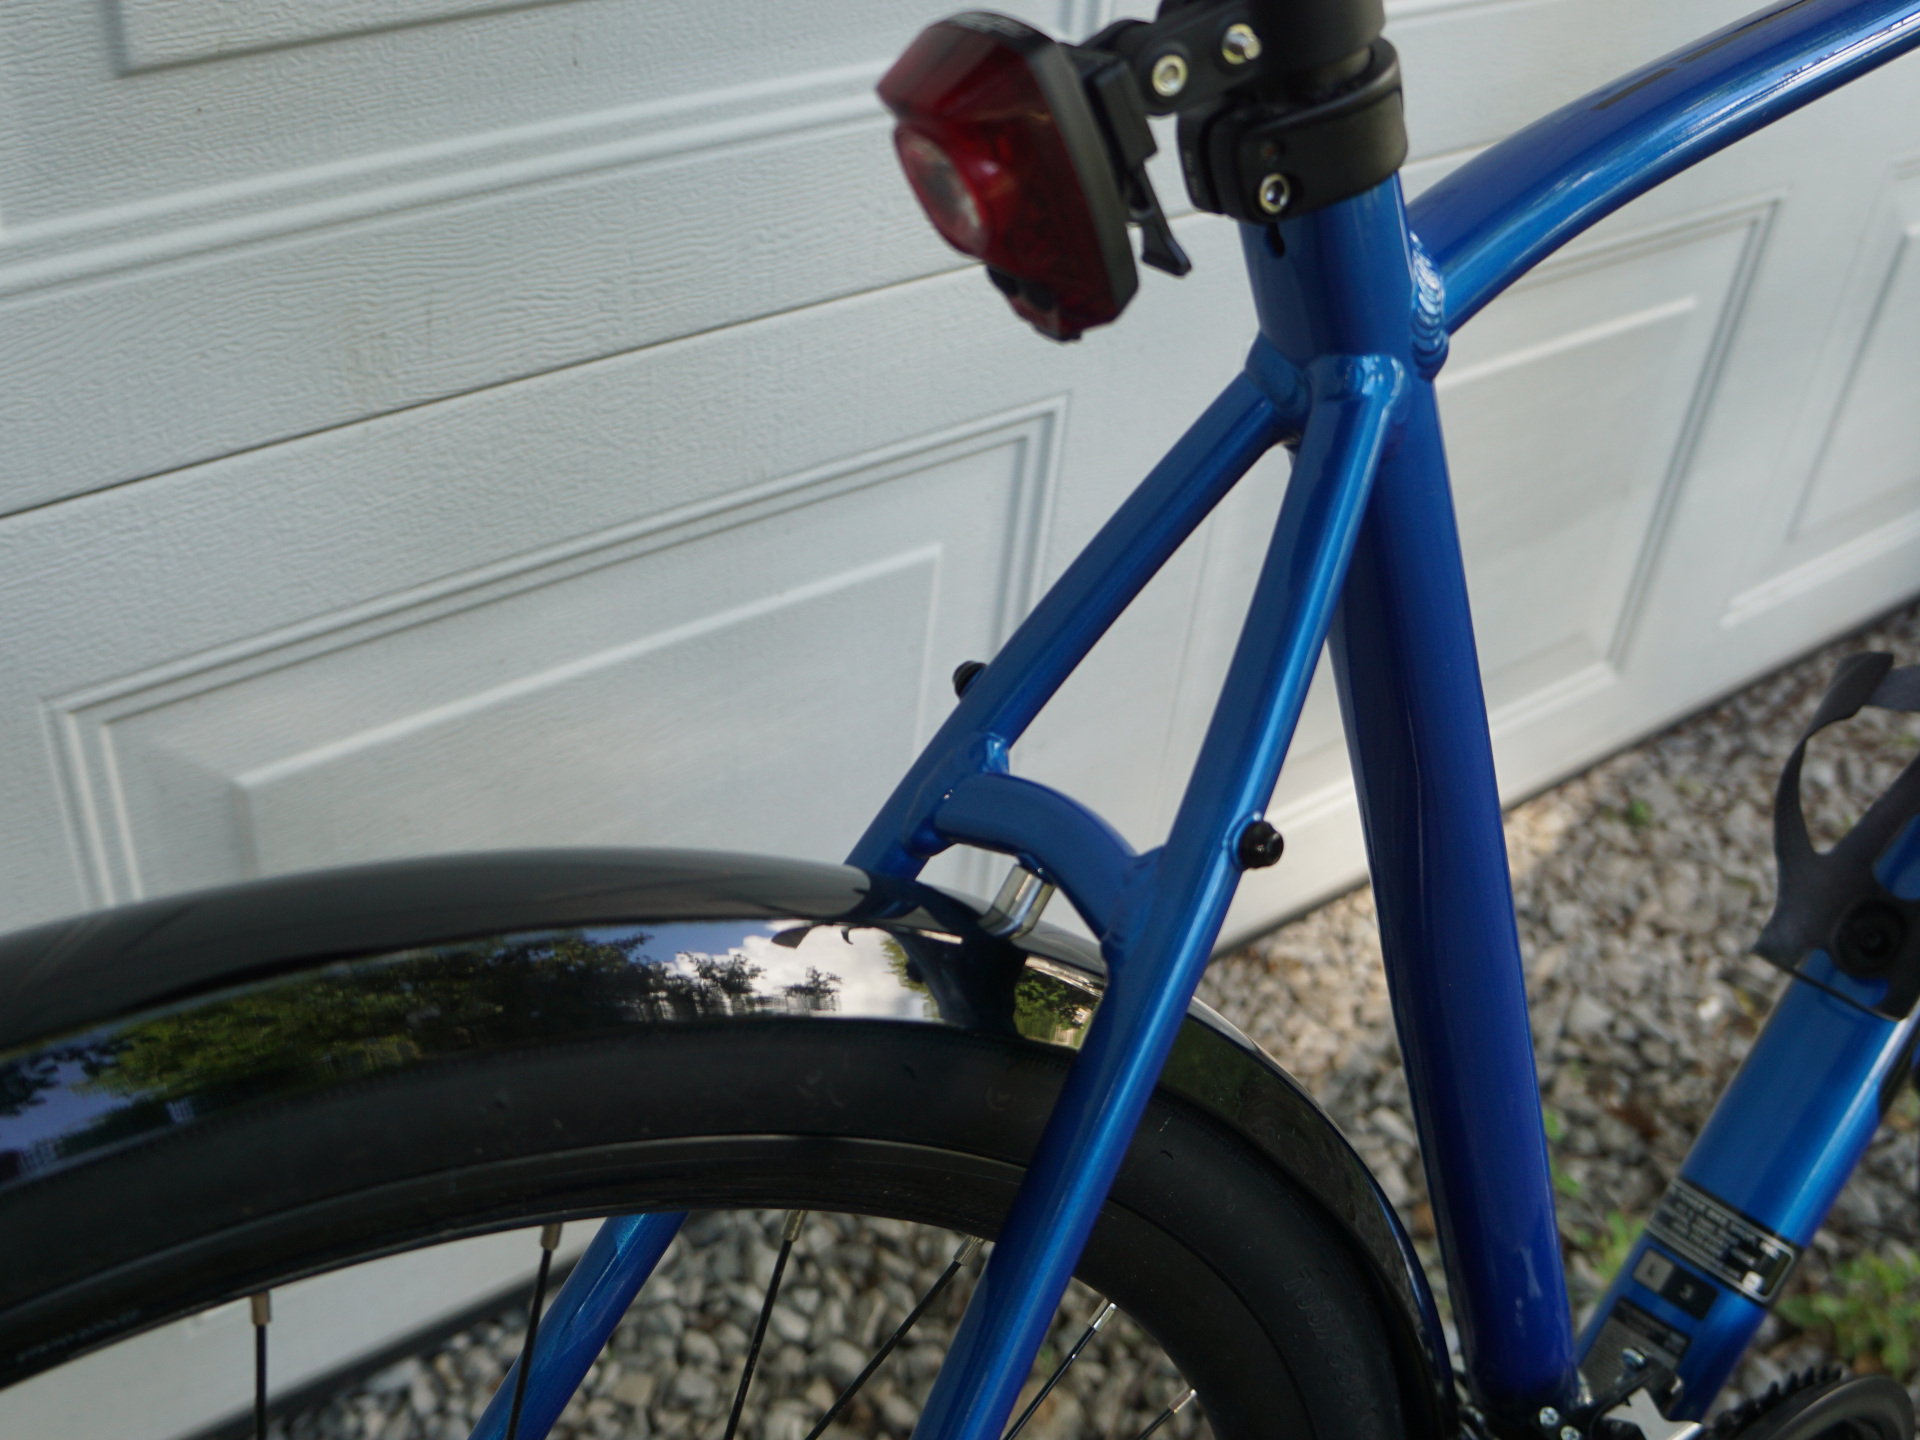 Fender attached to seat stay bridge, with DIY spacer